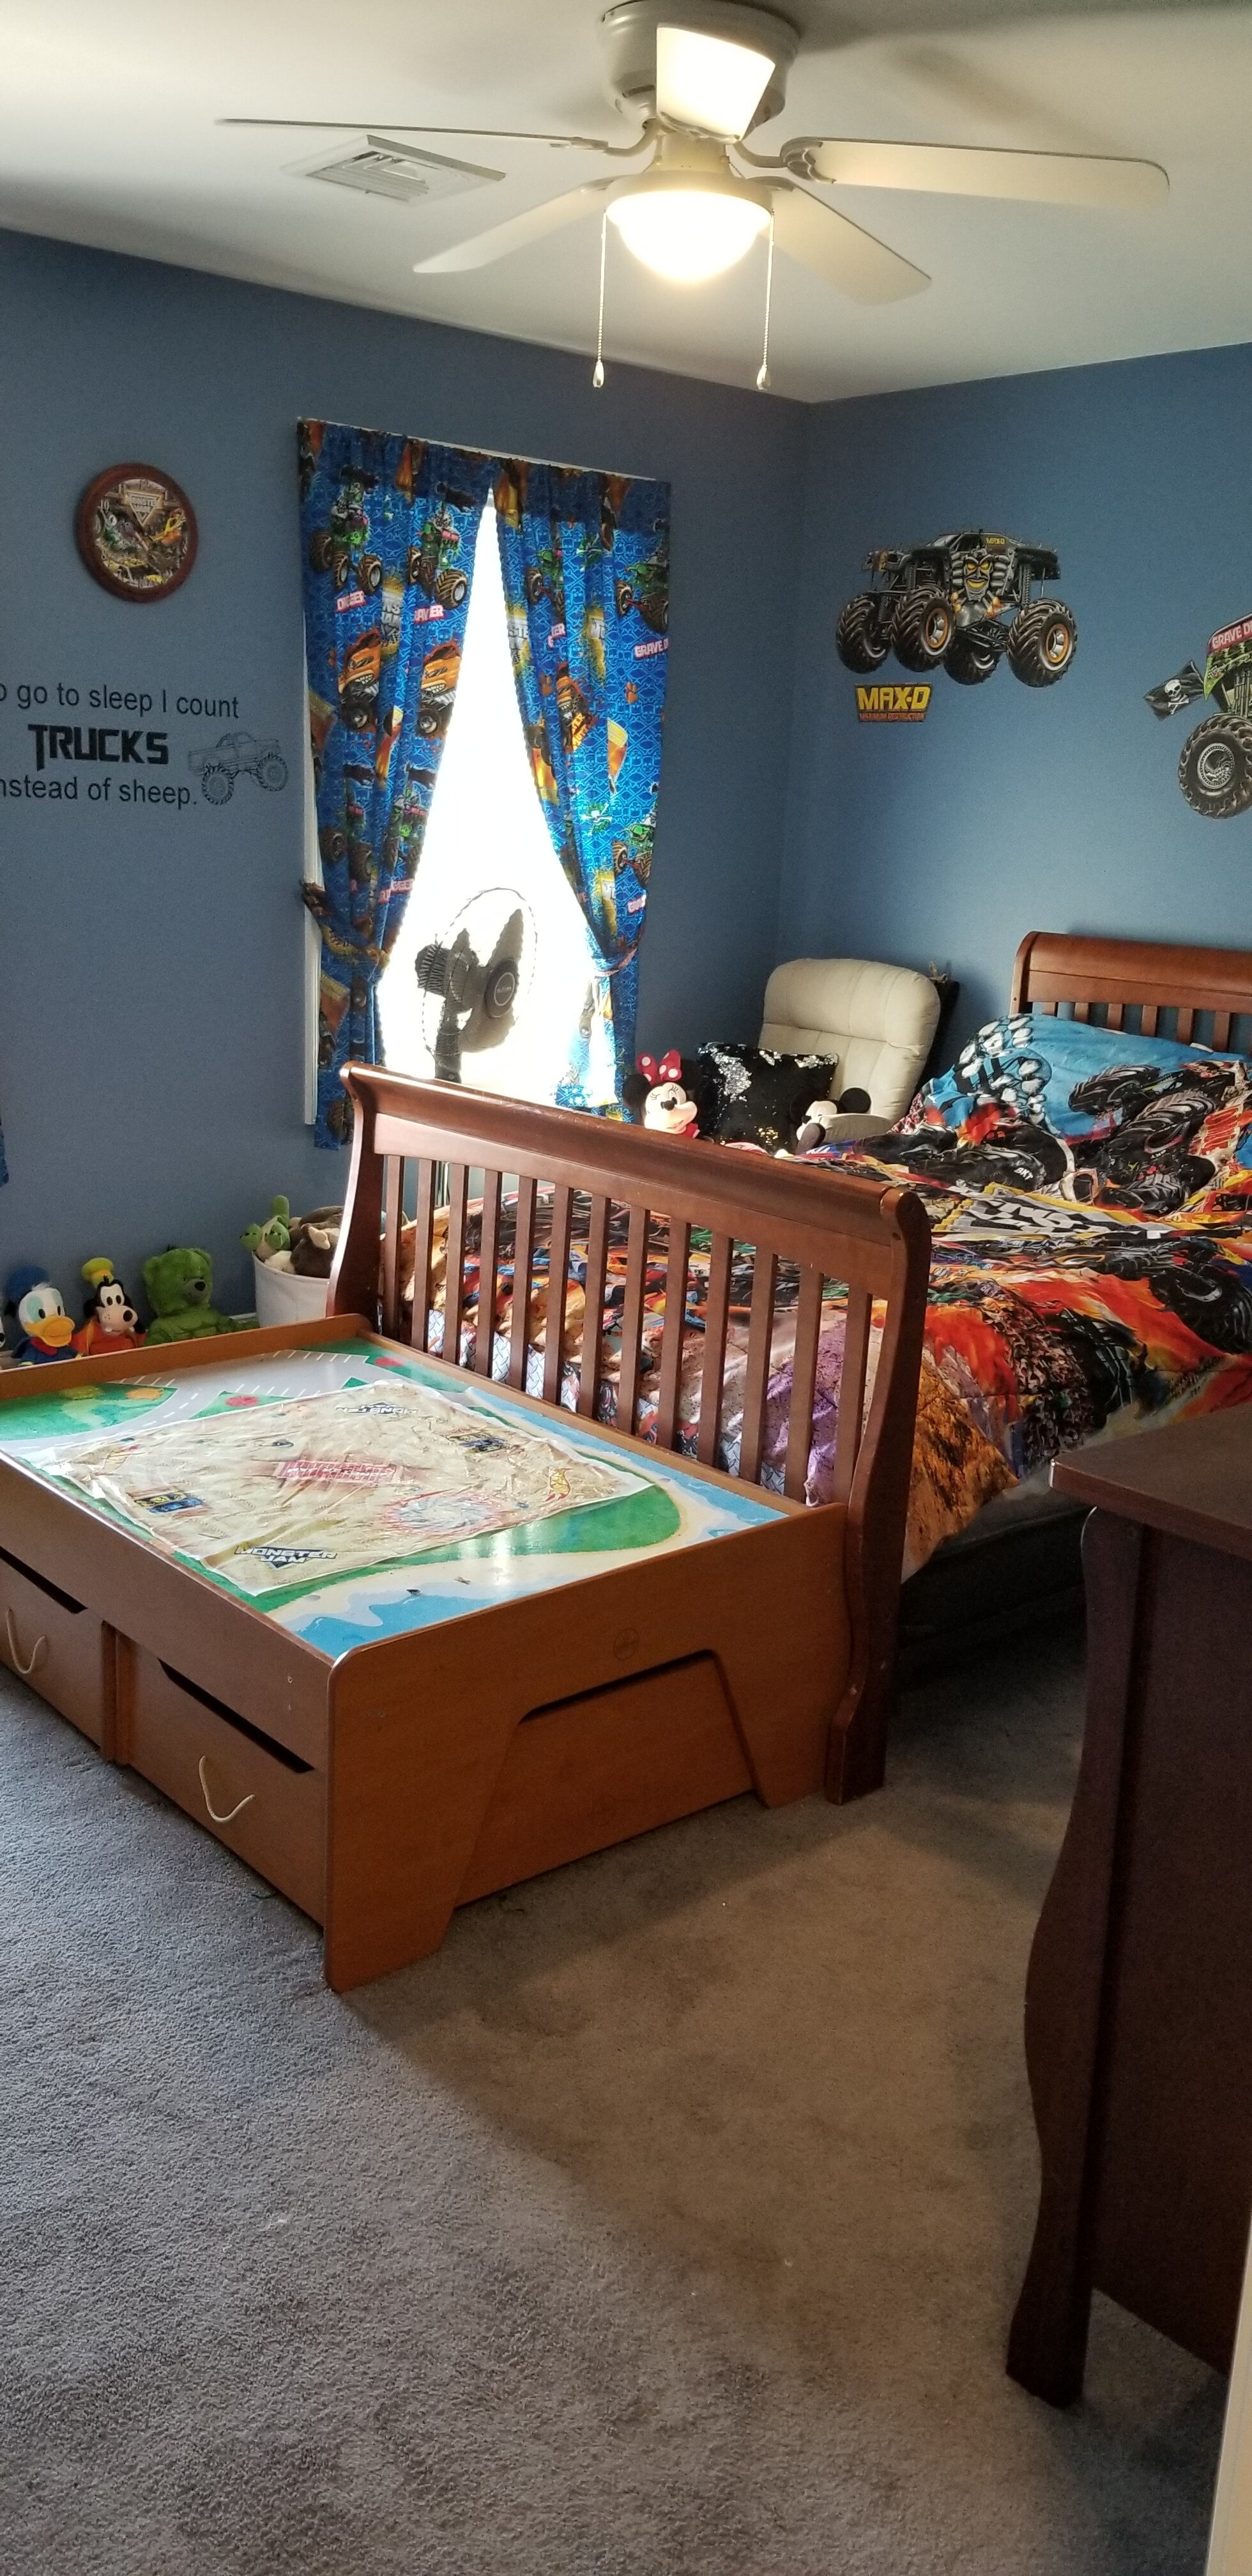 Child's room after